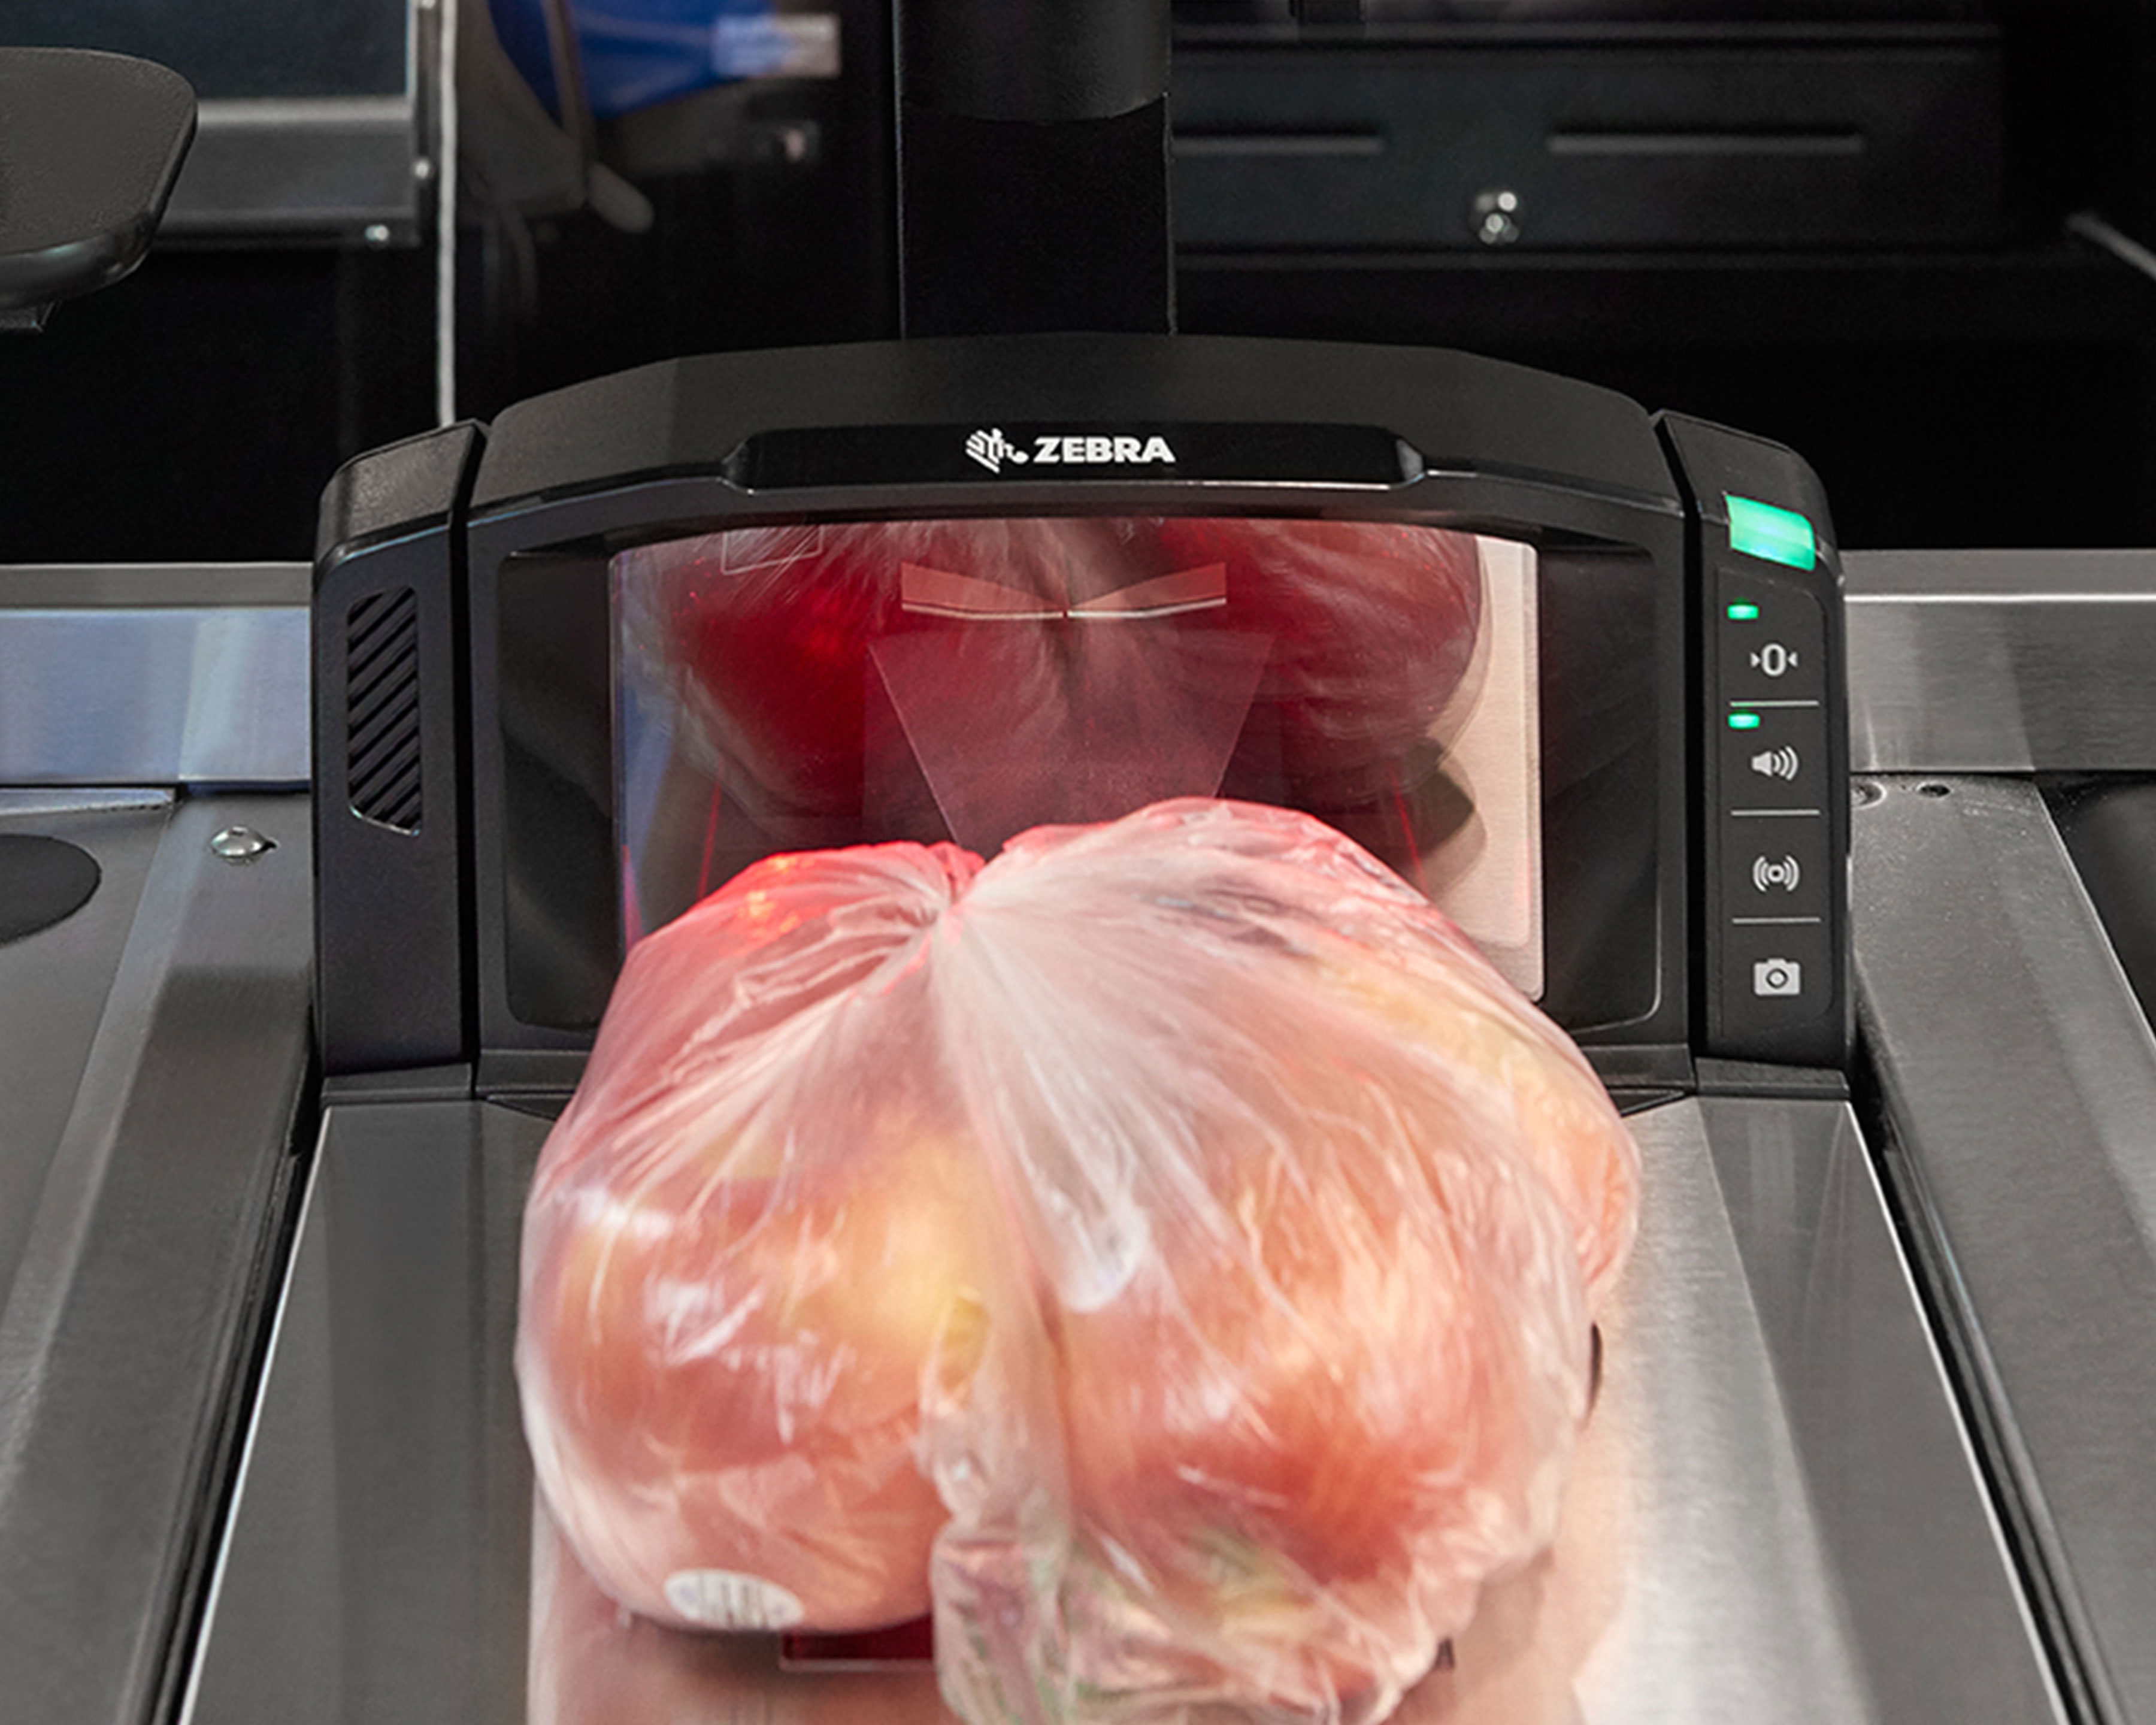 Zebra MP7000 scale scanner at a grocery store measures the weight of apples in a plastic bag